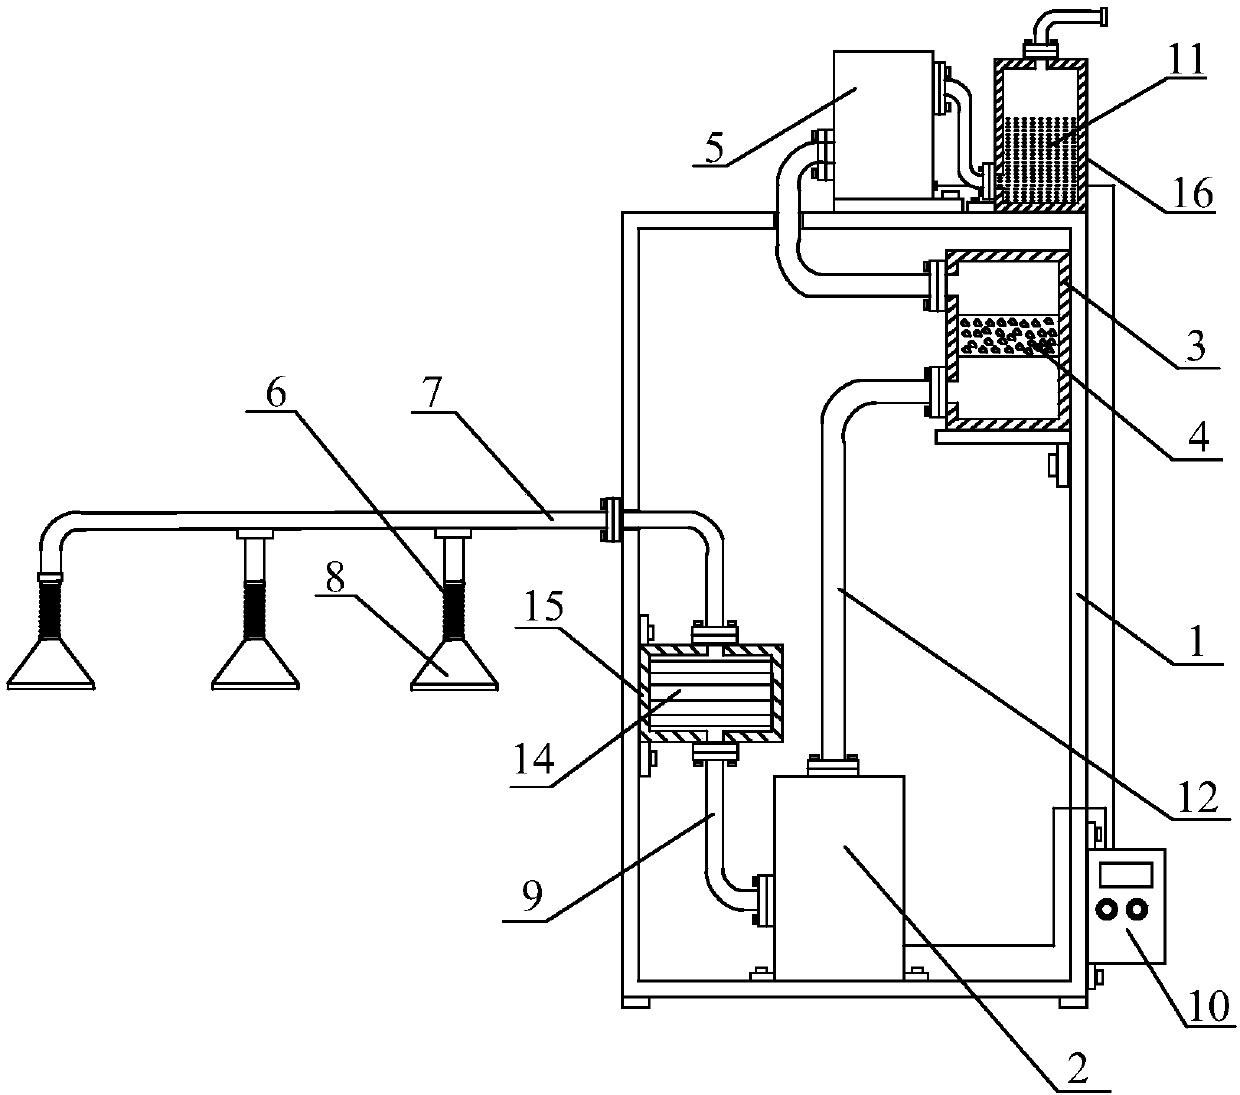 Smog emission device with smoke filtering and smoke diluting treatment